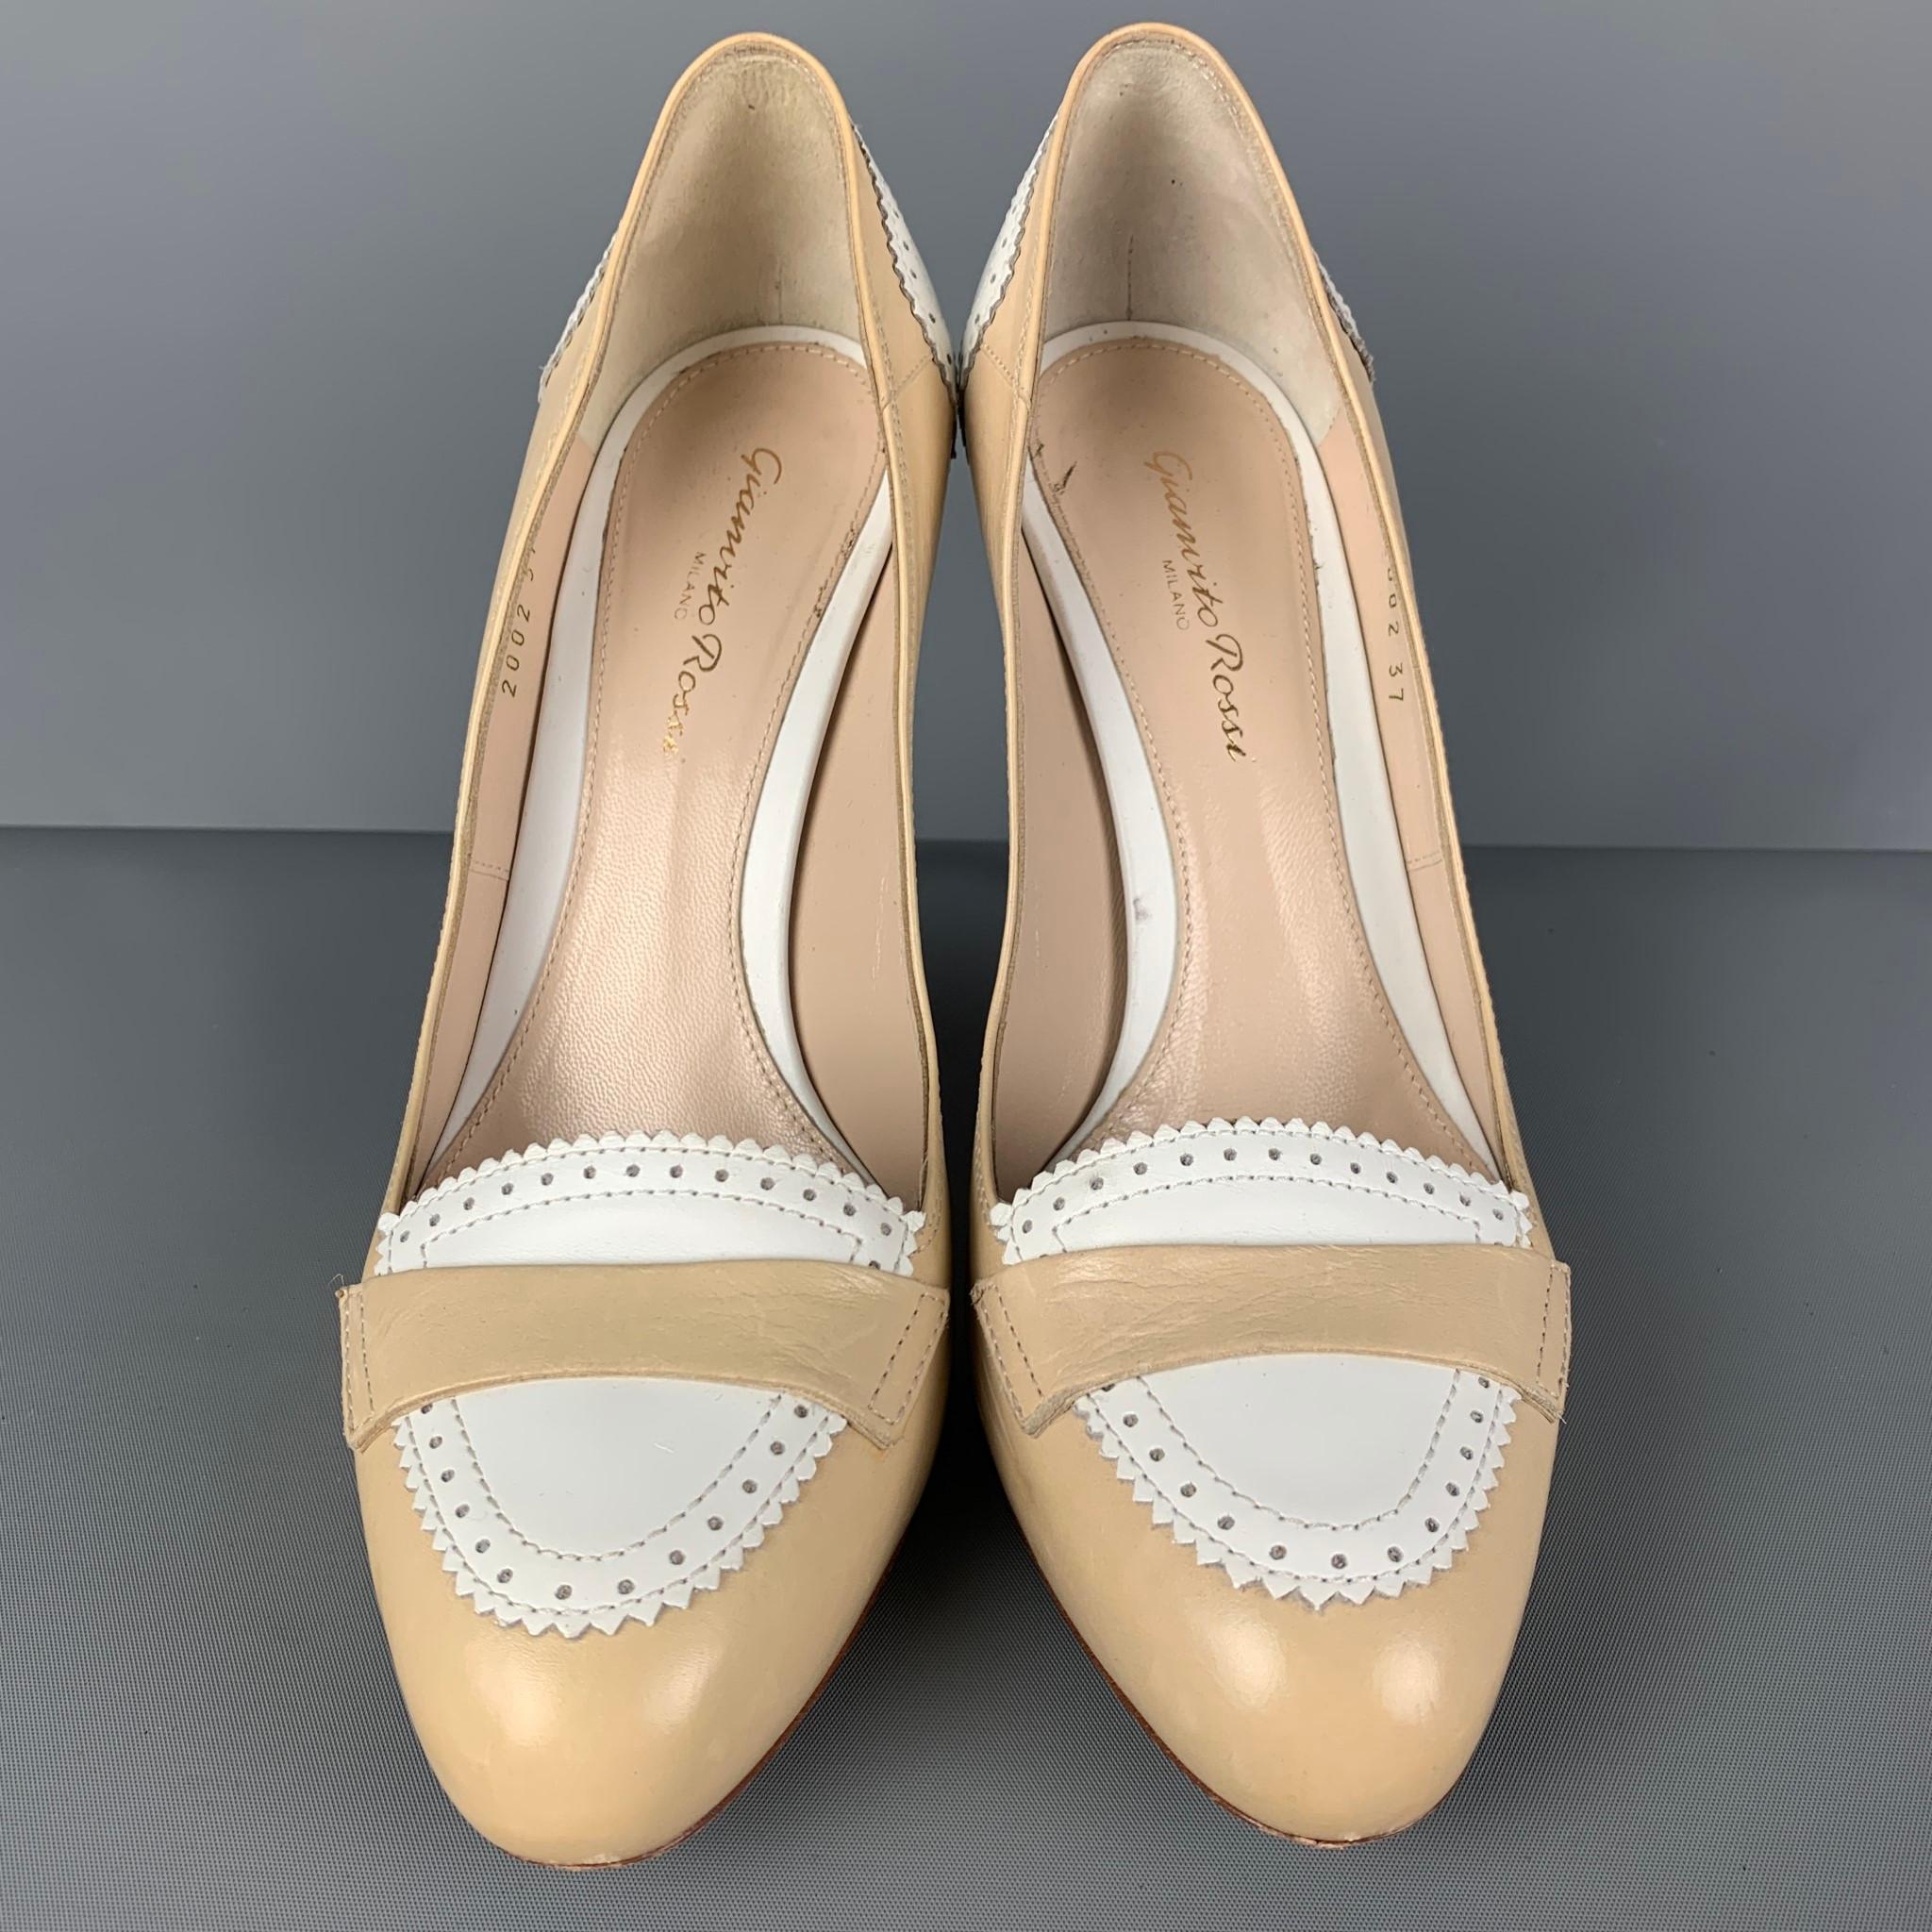 White GIANVITO ROSSI Size 7 Beige Cream Leather Perforated Pumps